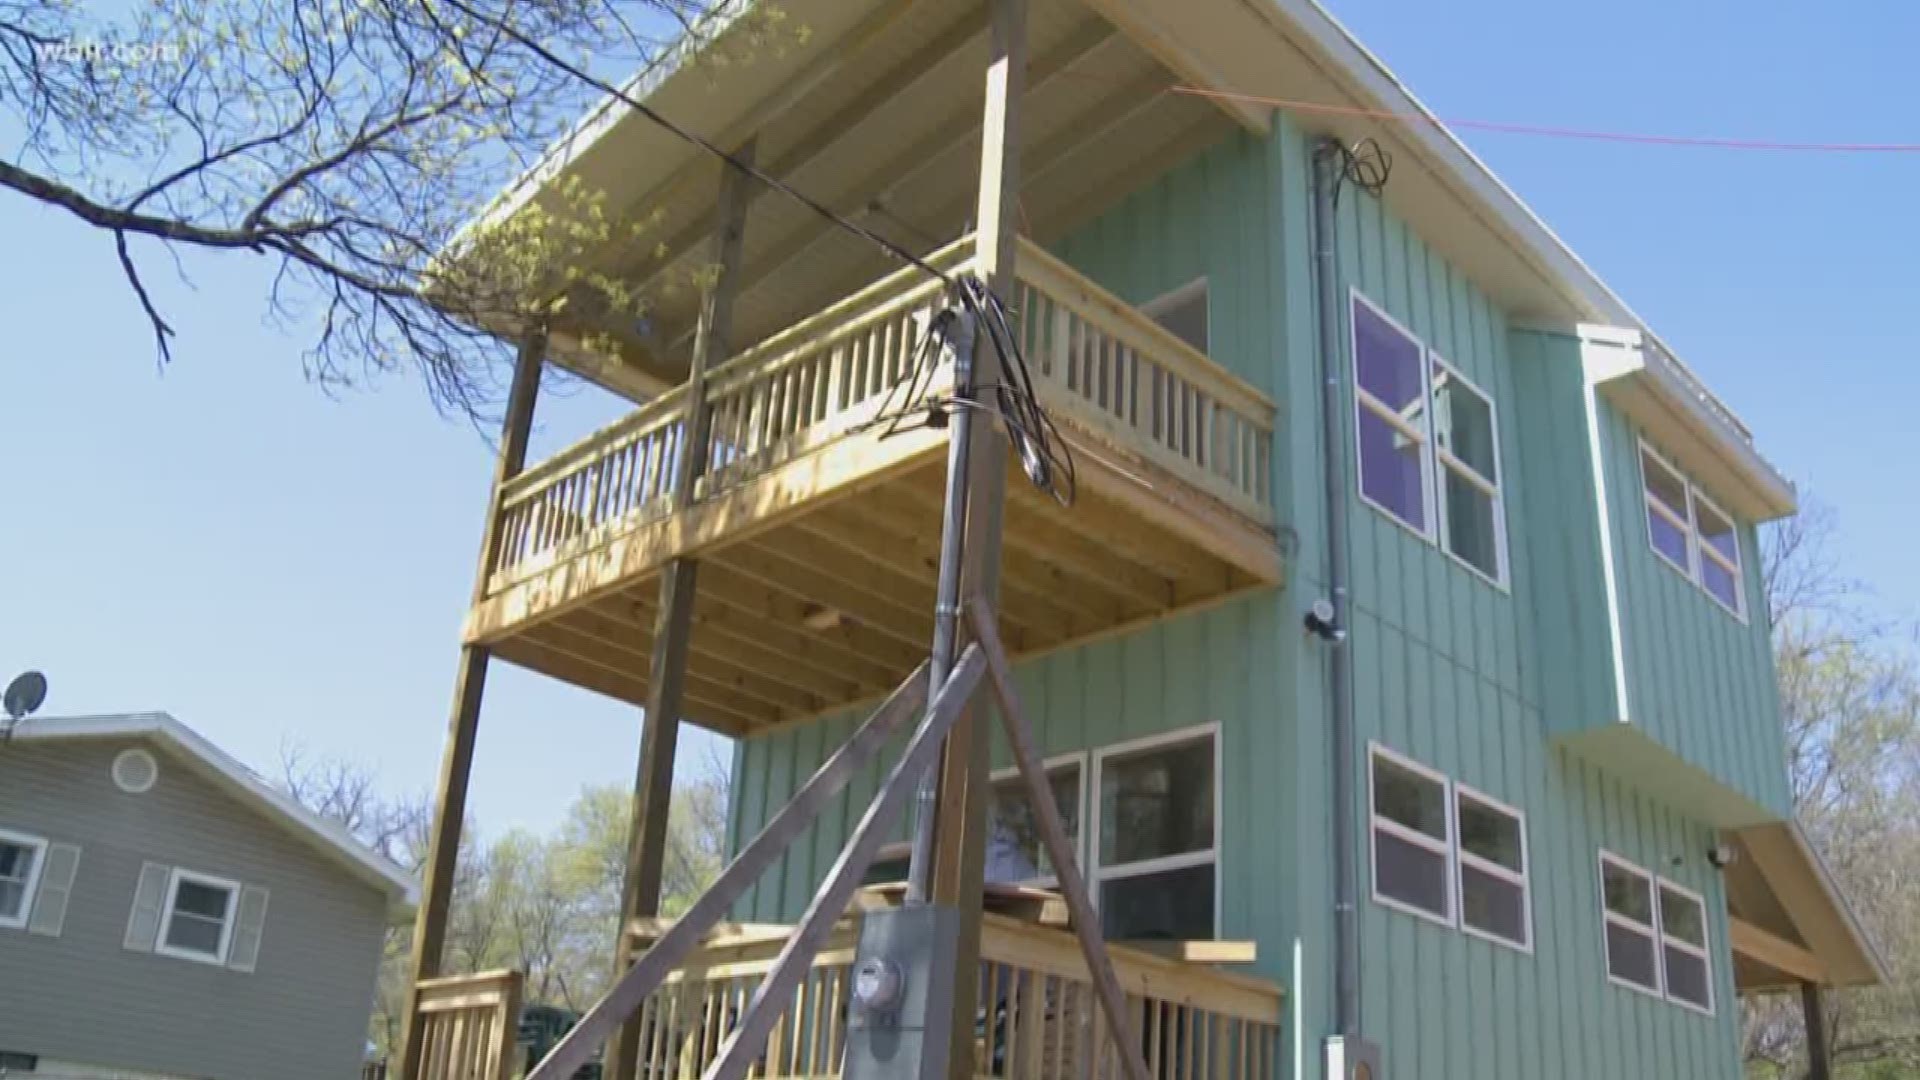 April 12, 2018: Developers are building 11 "urban cottages" in a Knoxville neighborhood, part of a growing trend of downsizing and tiny home living.